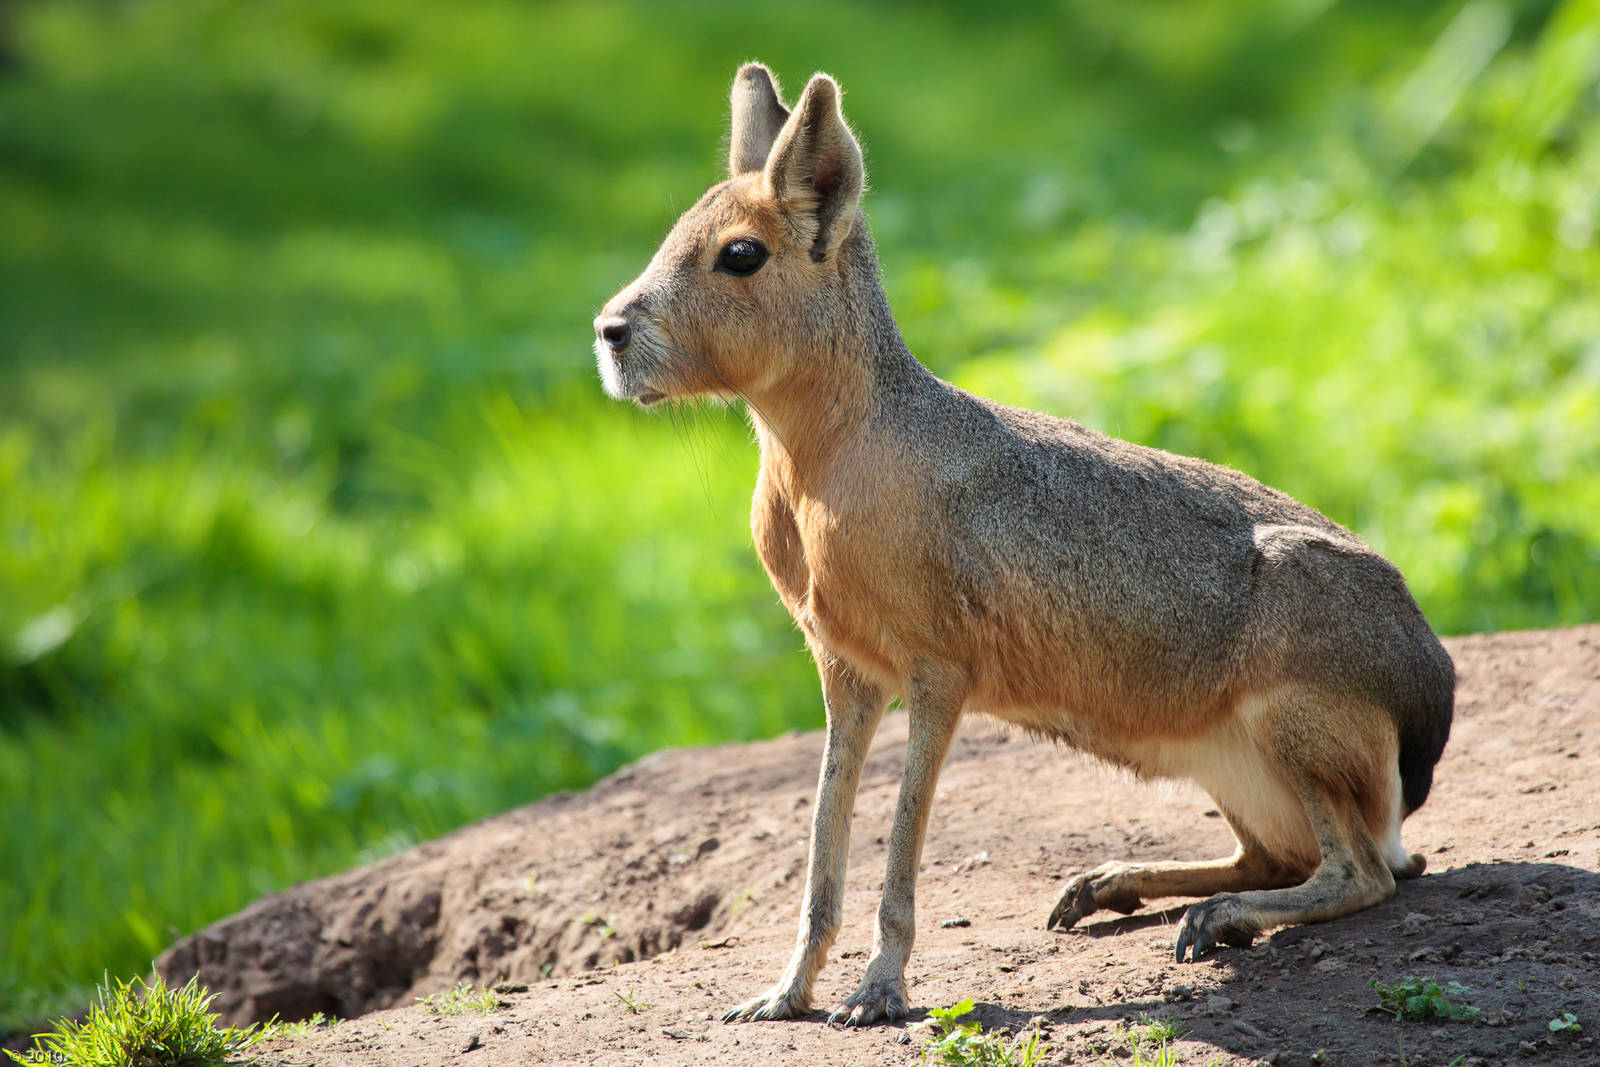 The Patagonian Mara is a relatively large rodent found in parts of Argentina.  This herbivorous, somewhat rabbit-like animal has distinctive long ears and long limbs and its hind limbs are longer and more muscular than its forelimbs.